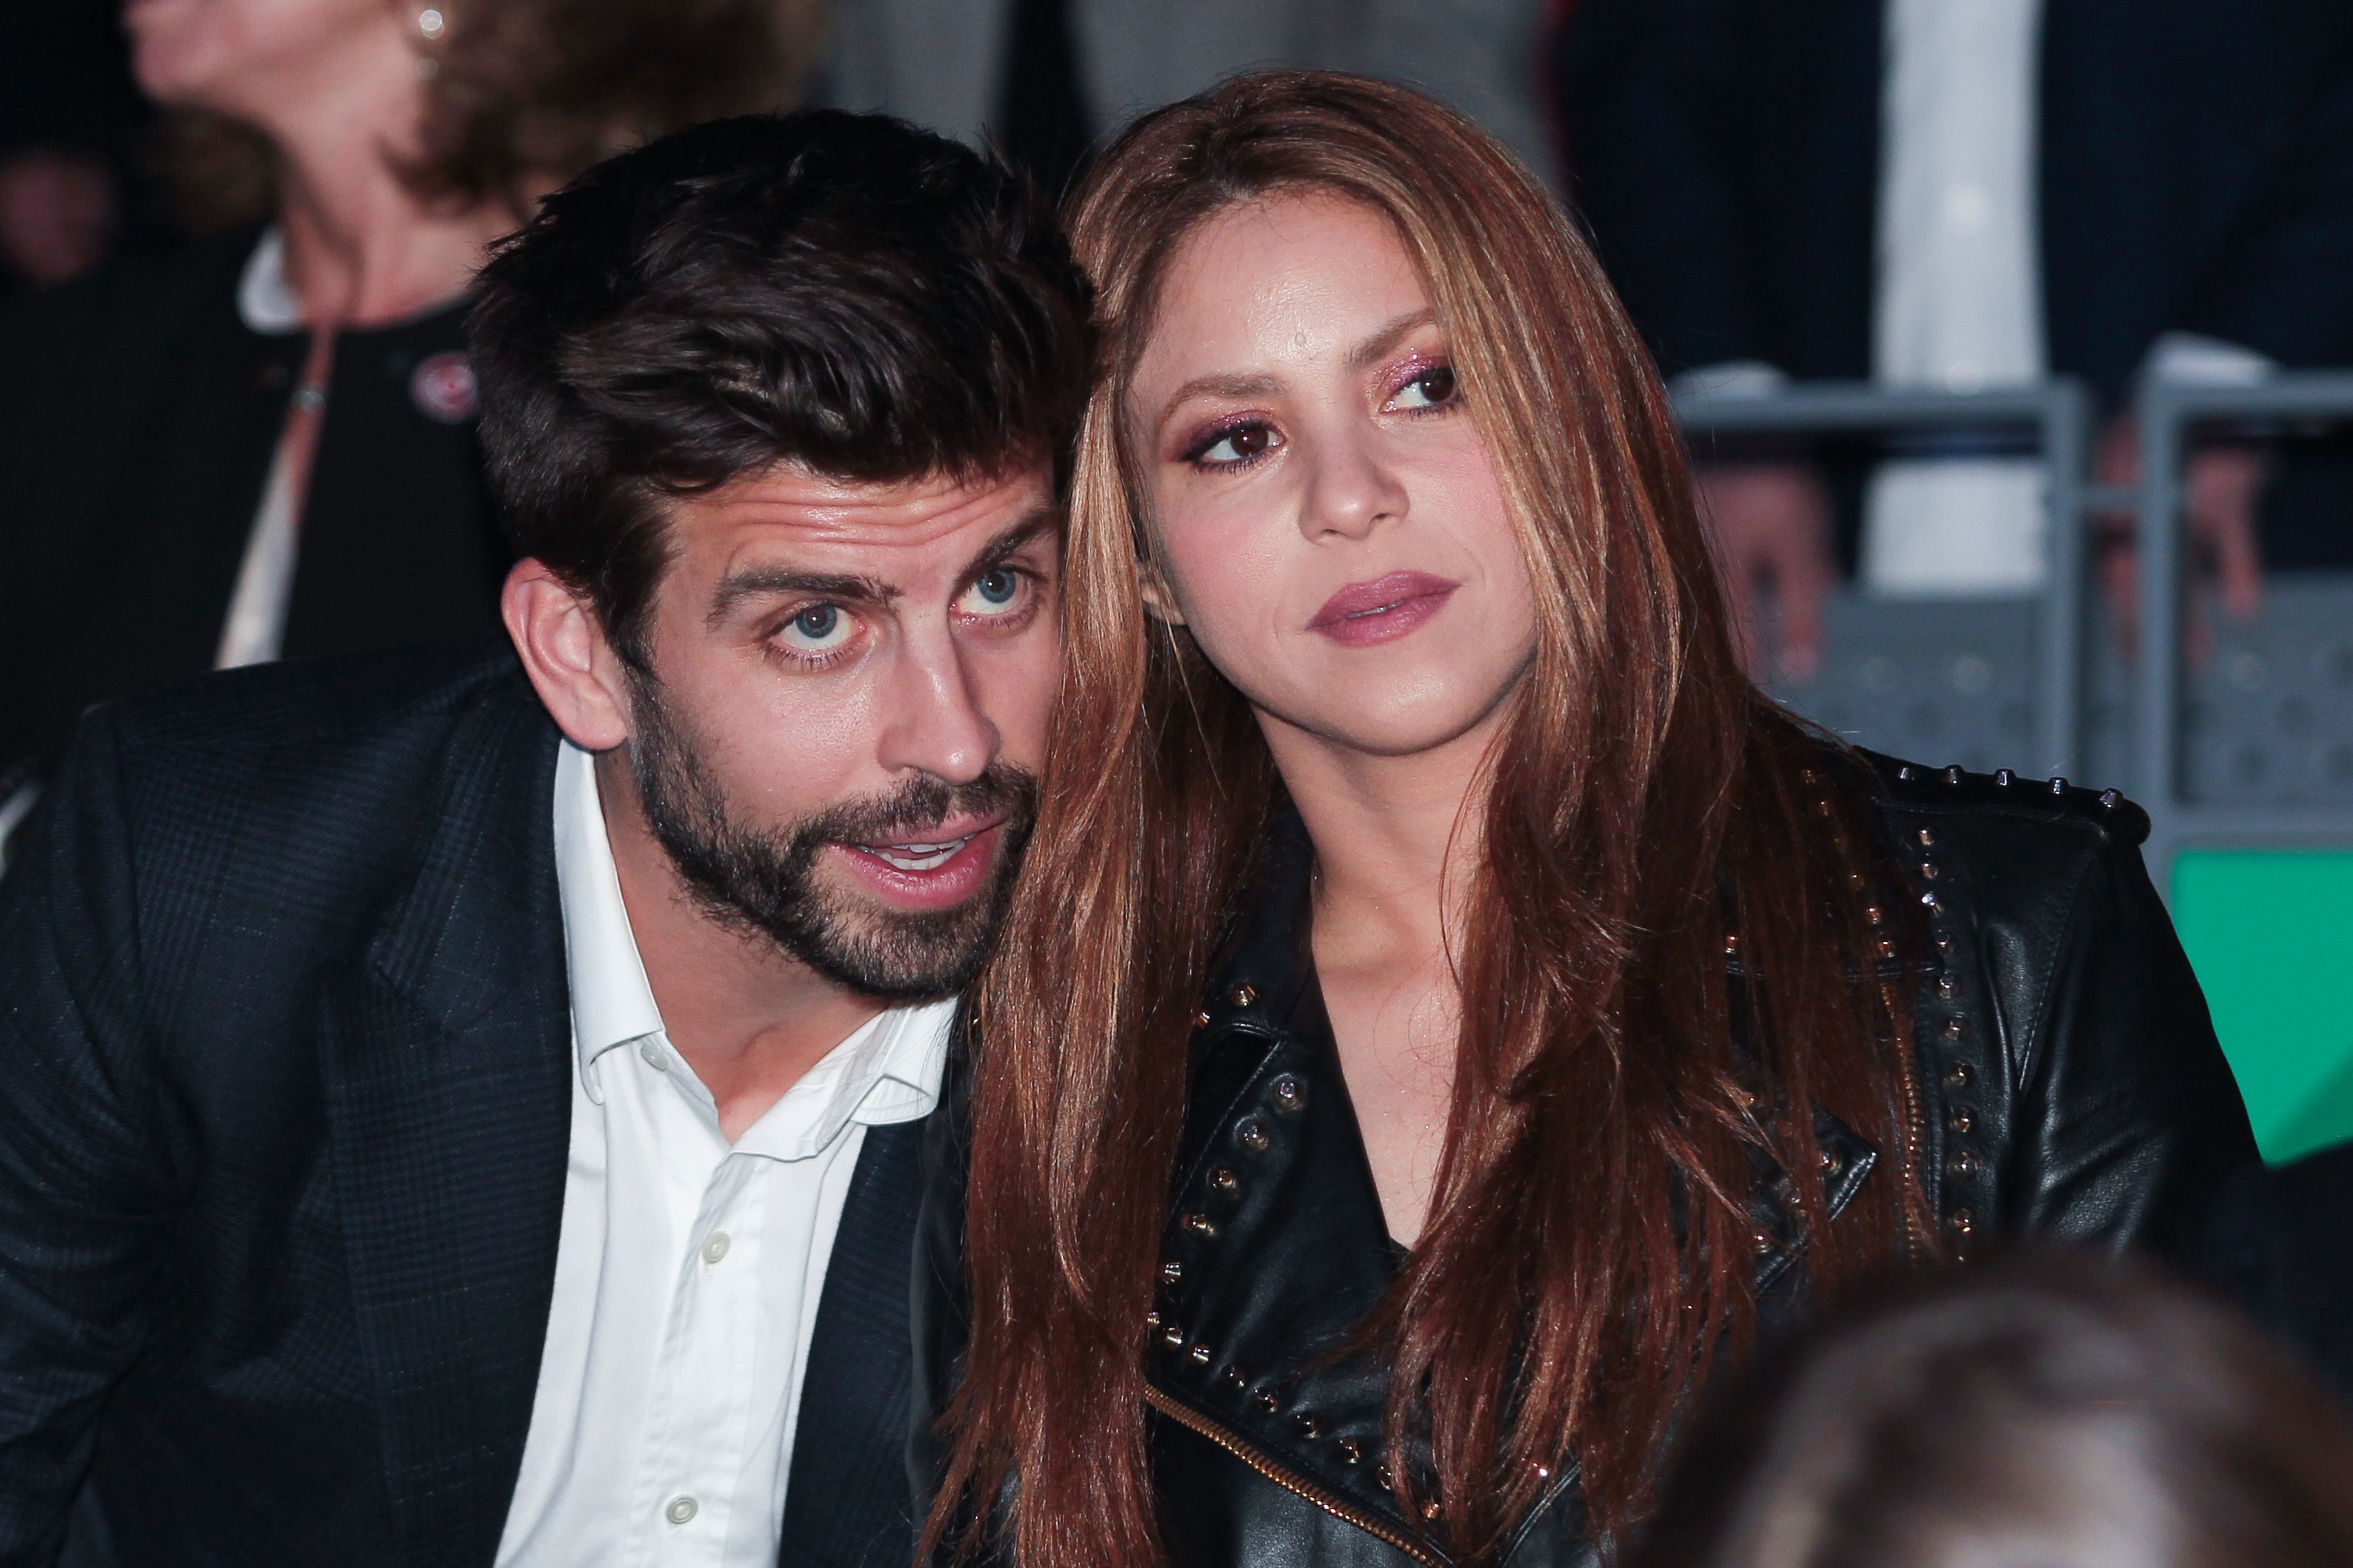 Xxx Brother Blakmails Sister Rep Sex - How Shakira discovered Gerard PiquÃ©'s alleged affair, more notorious  infidelity scandals | Gallery | Wonderwall.com